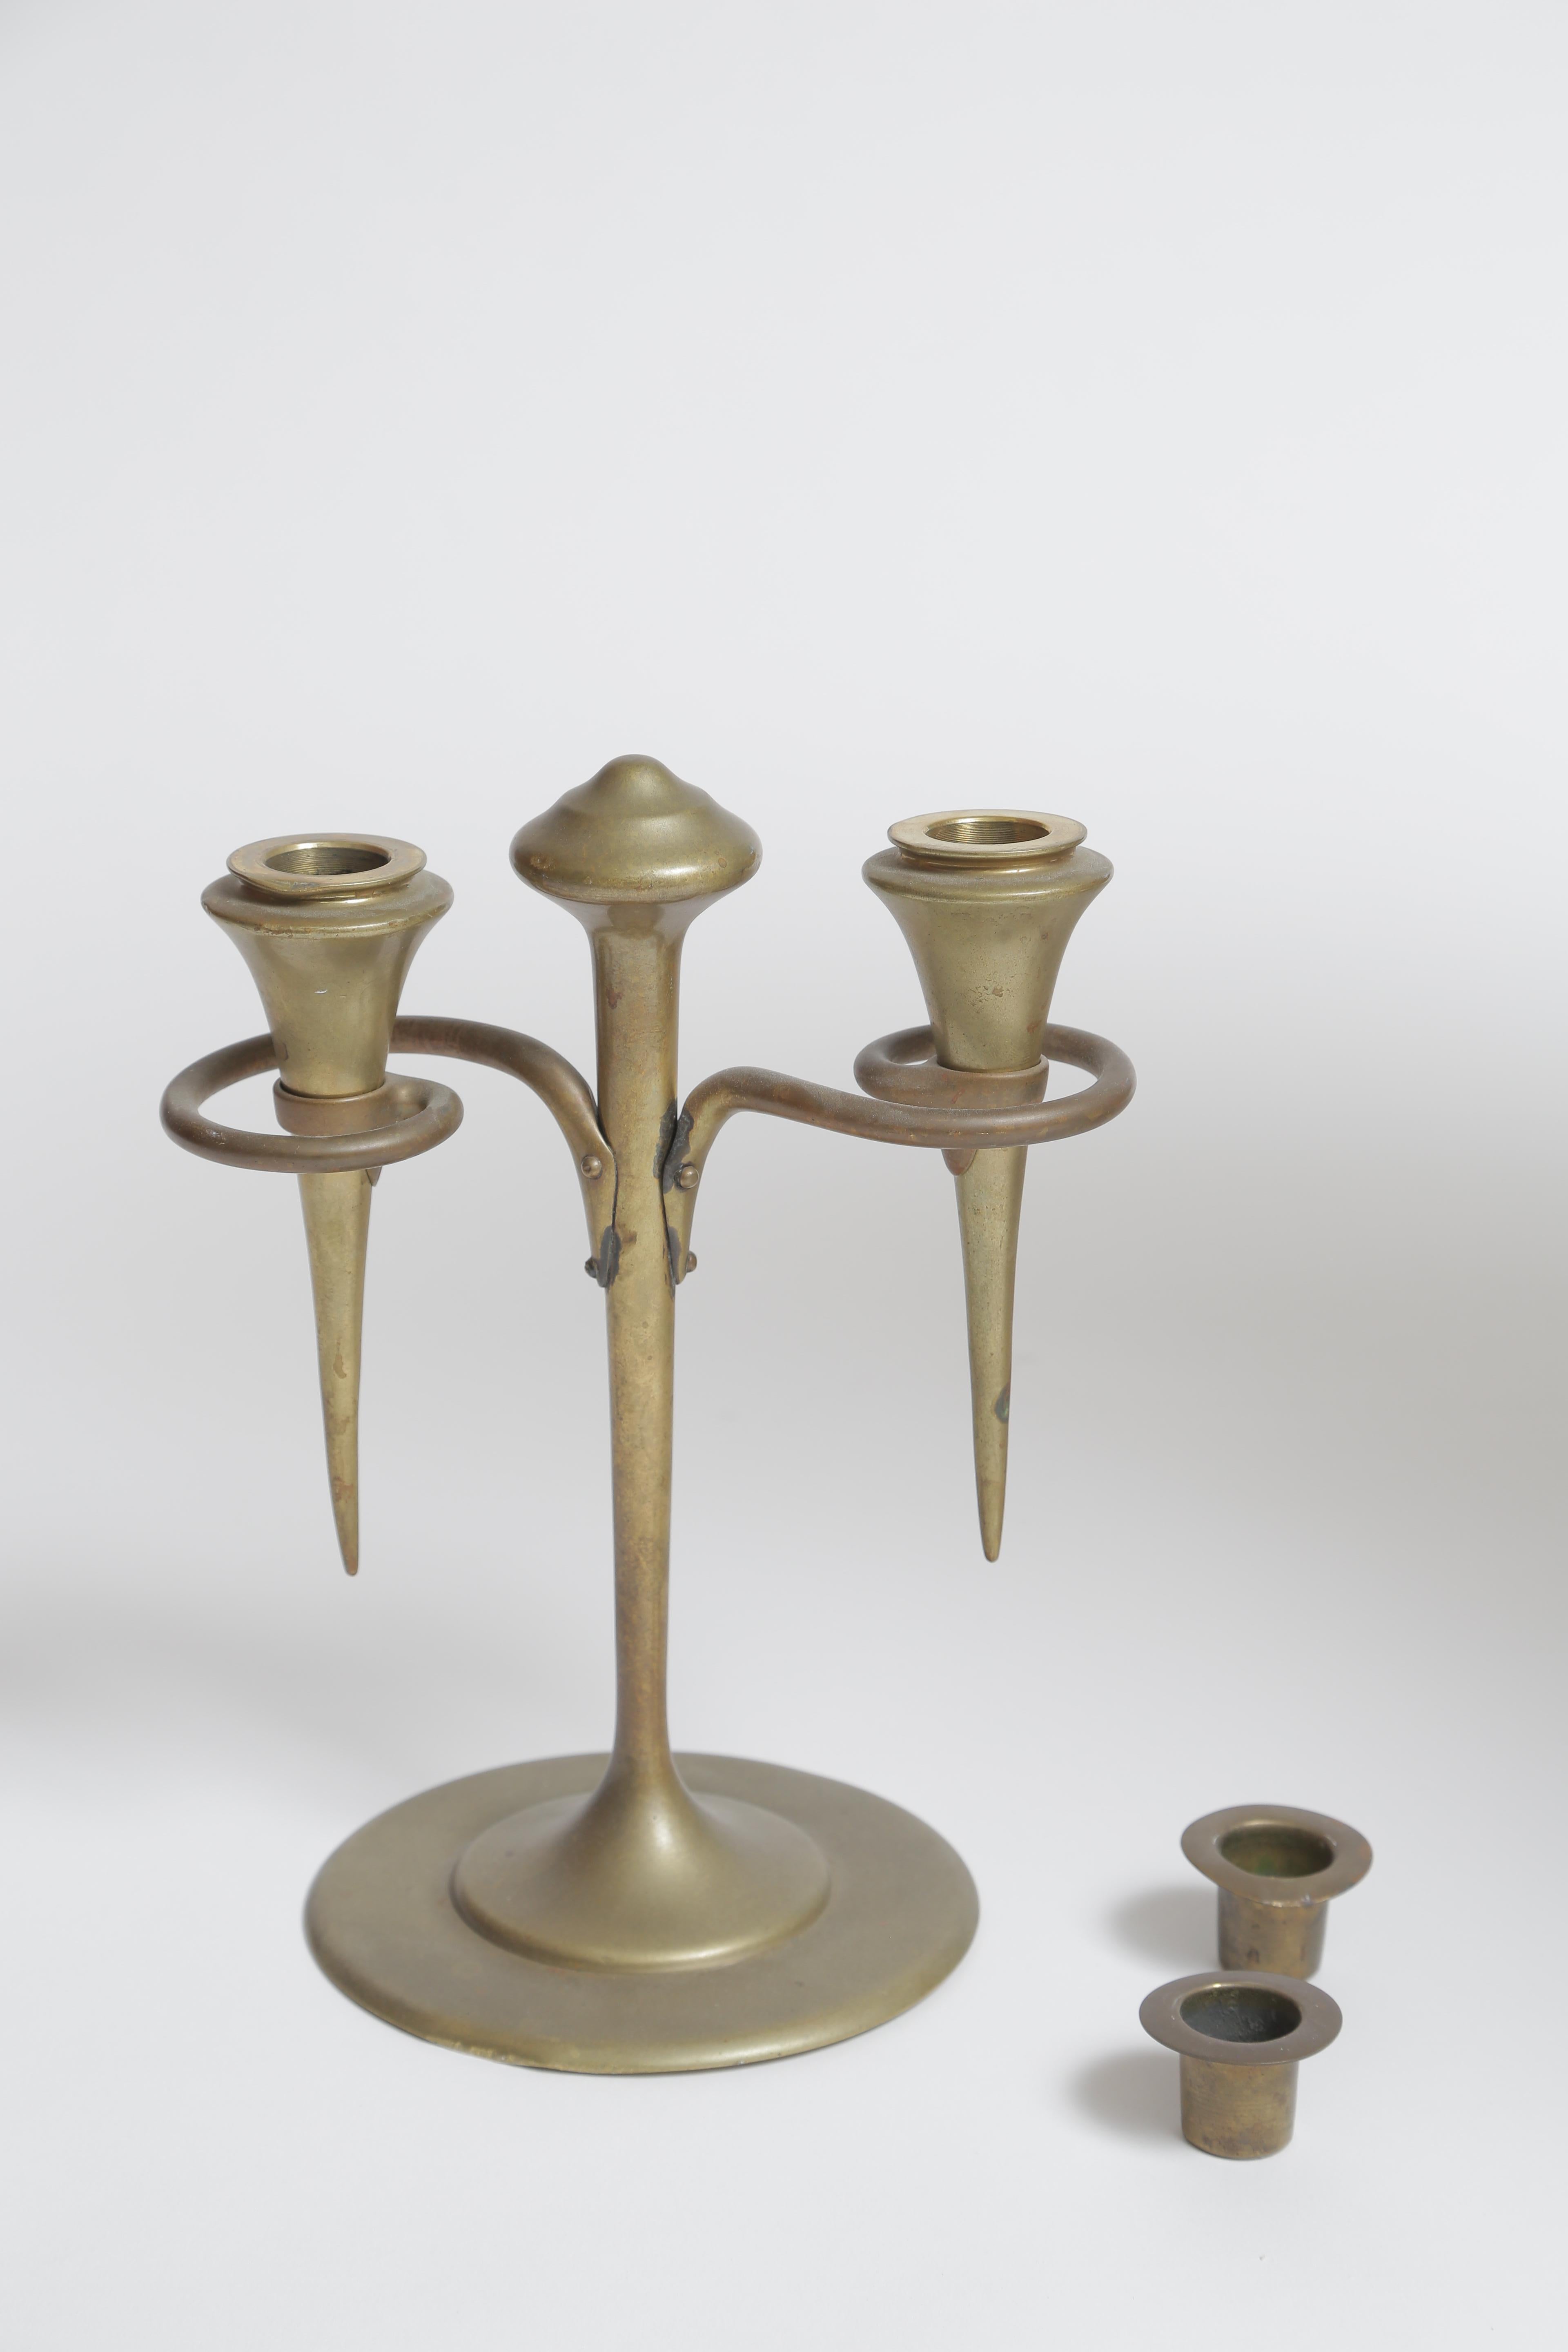 Robert Jarvie Omicron Two-Branch Candlestick For Sale 1